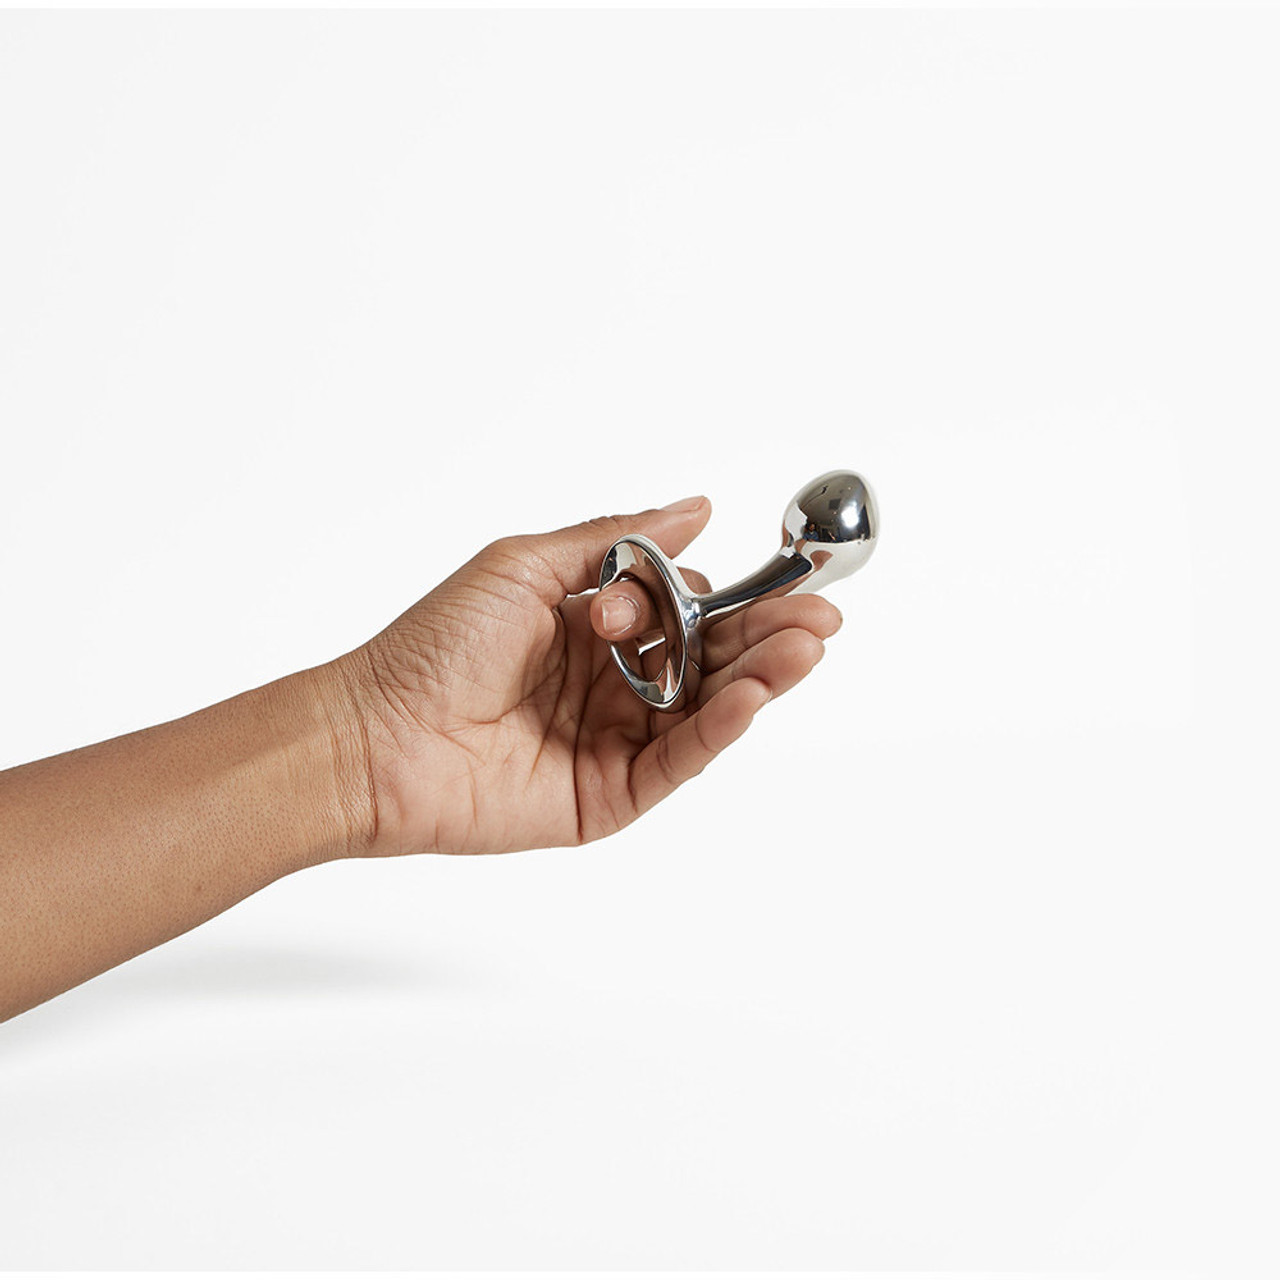 Njoy Pure Plugs held in a hand